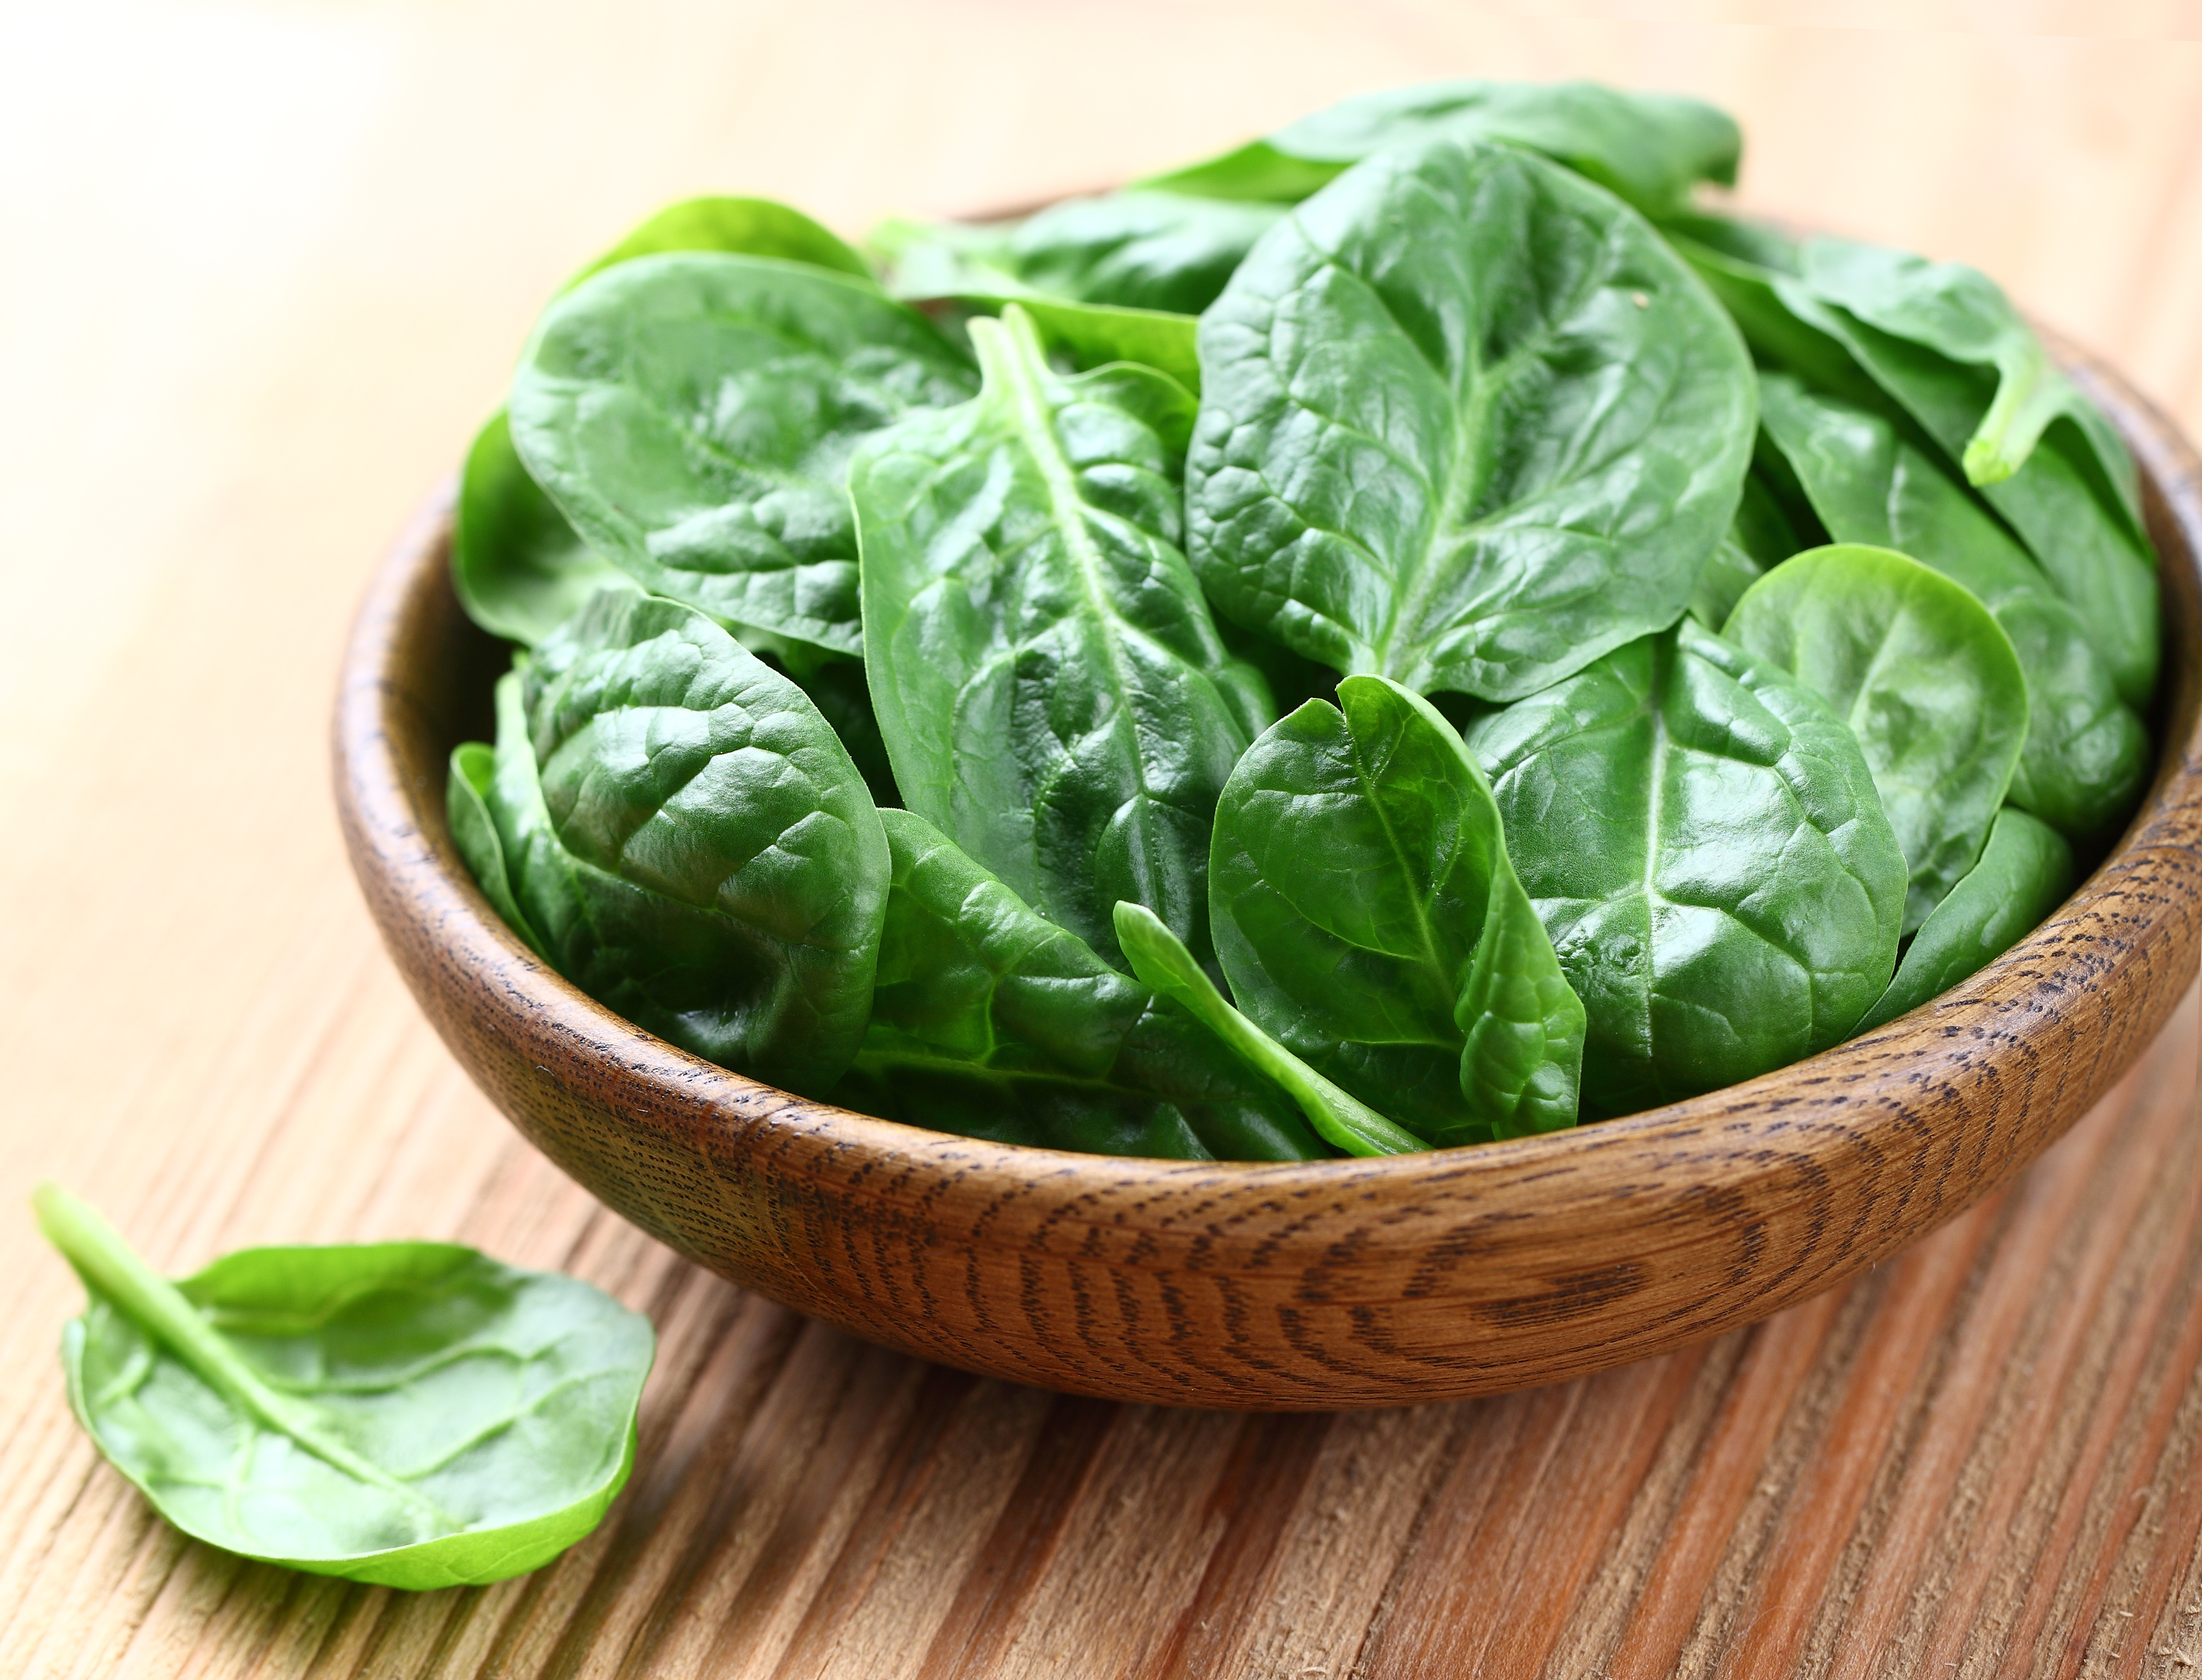 Food Facts: Spinach